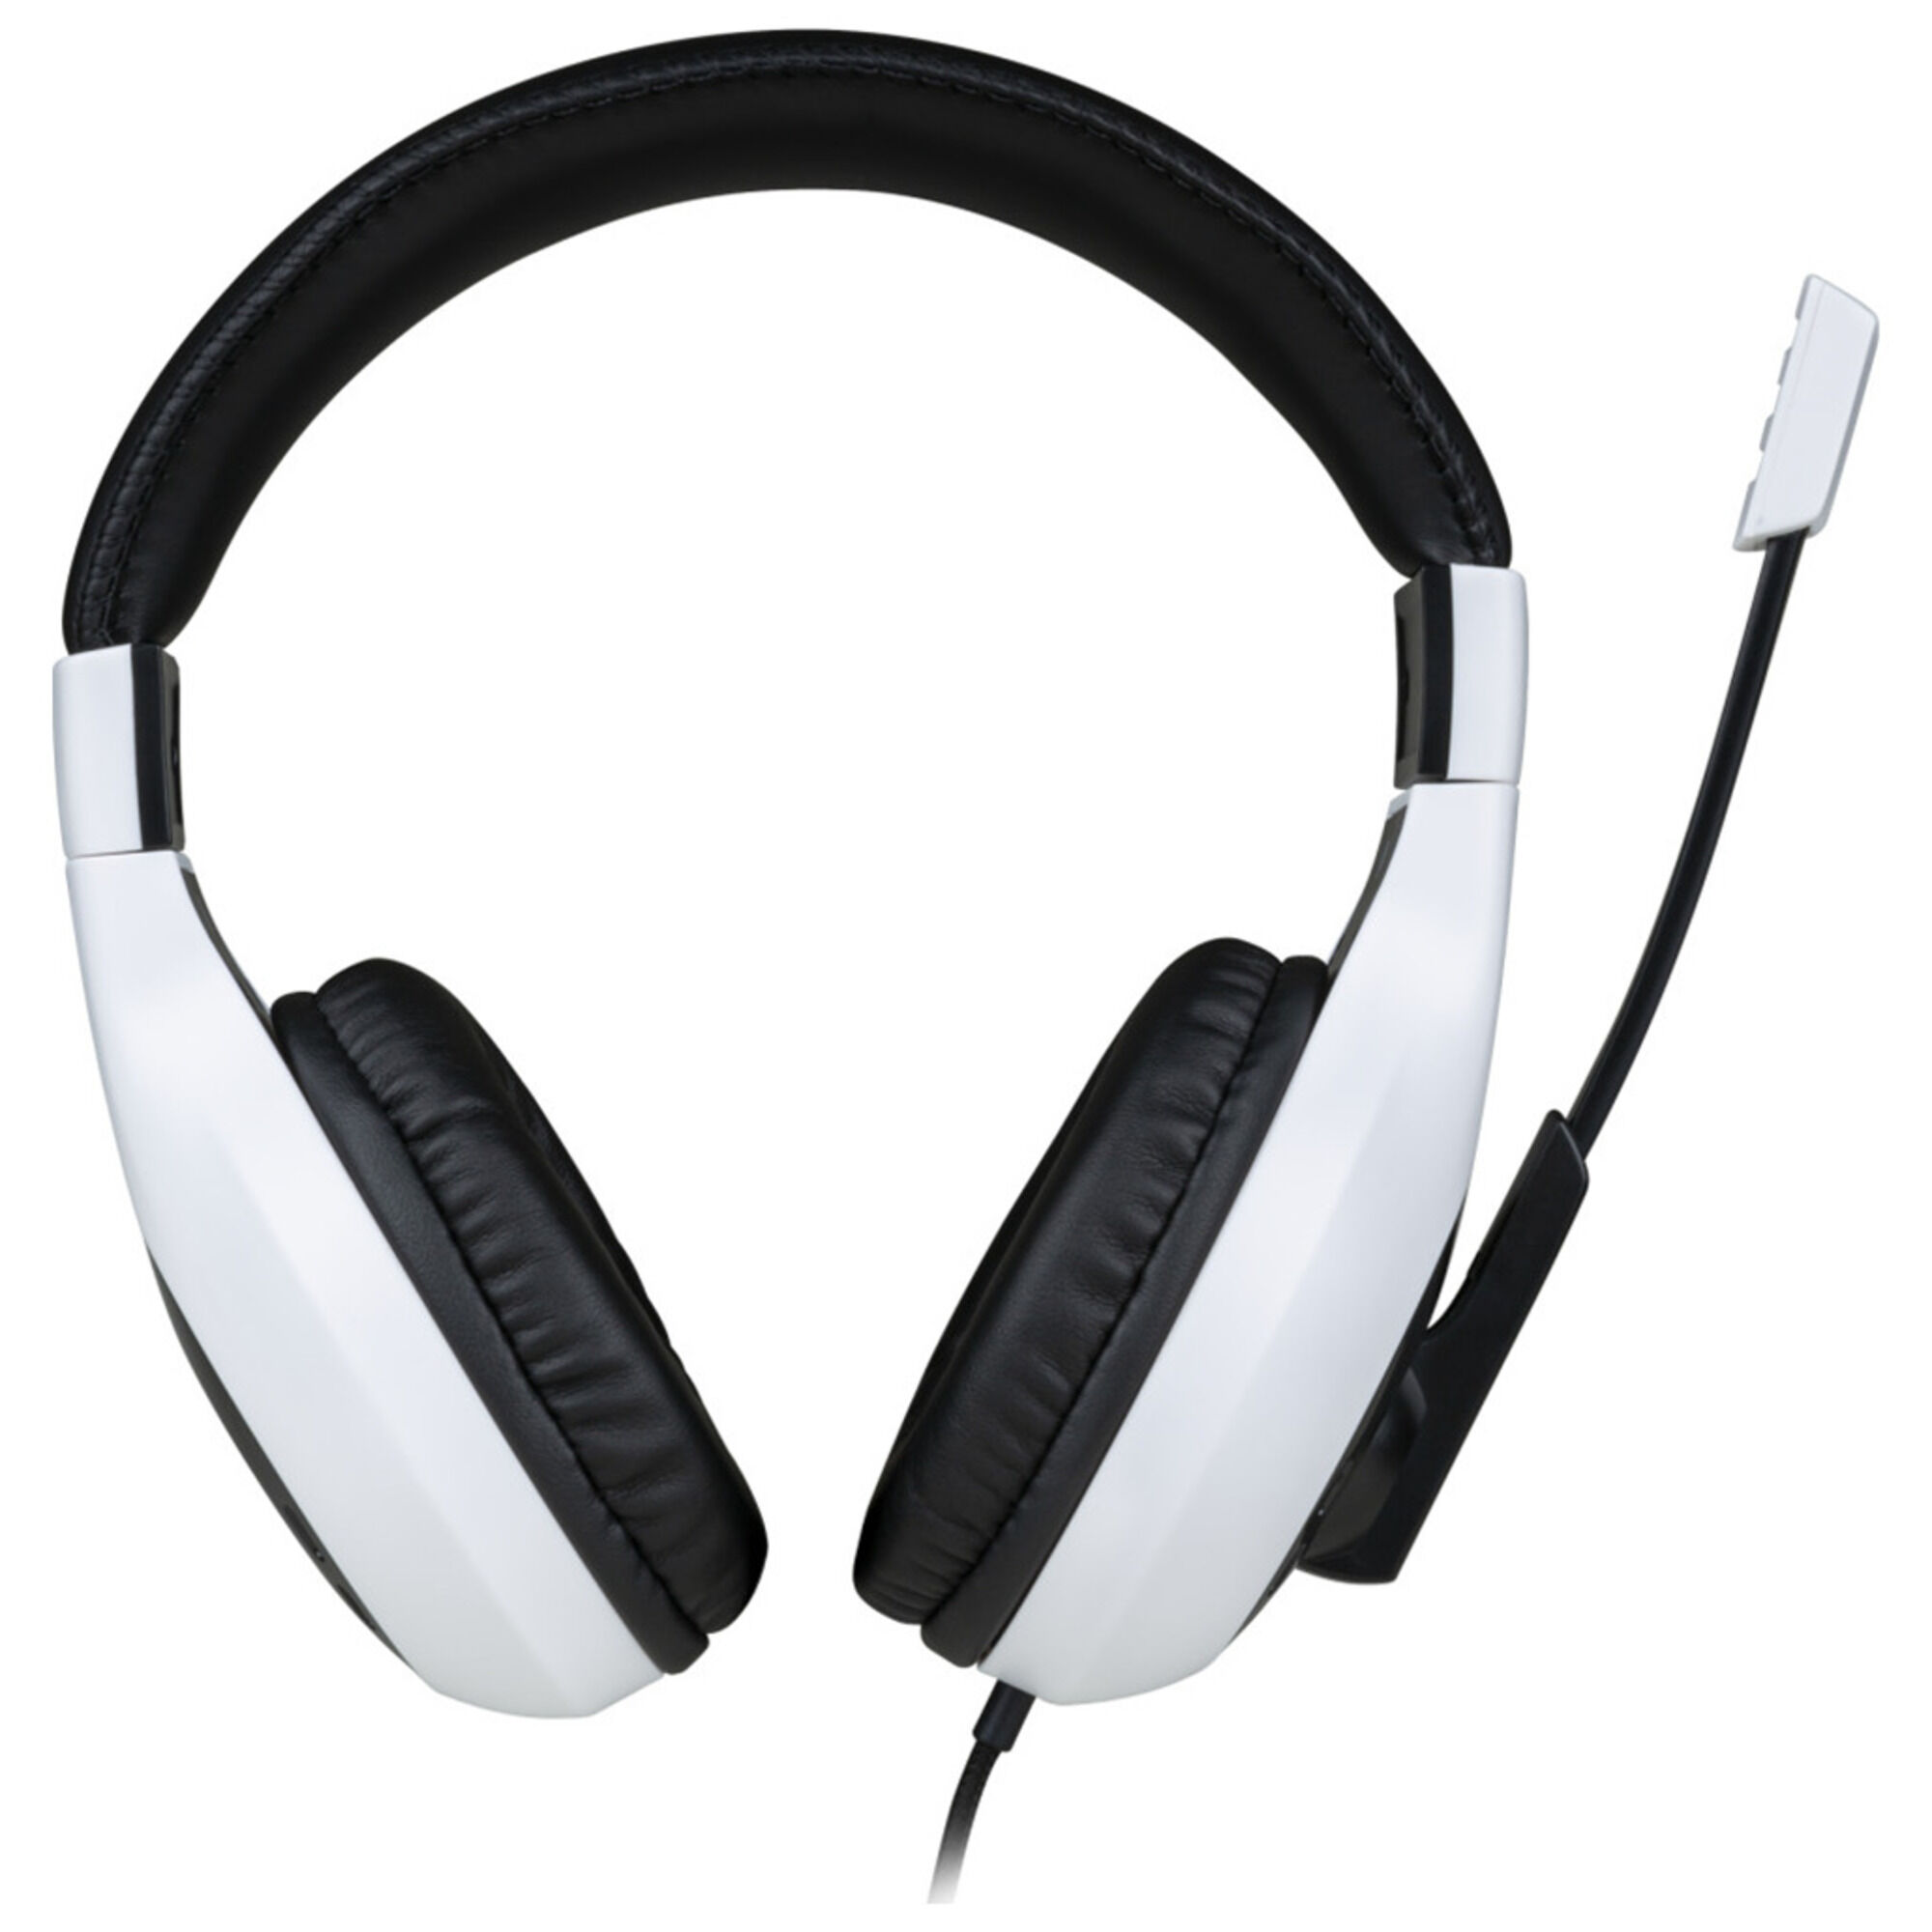 Bigben Connected Casque PC Filaire Jack 3.5mm avec micro Blanc Bigben - Neuf